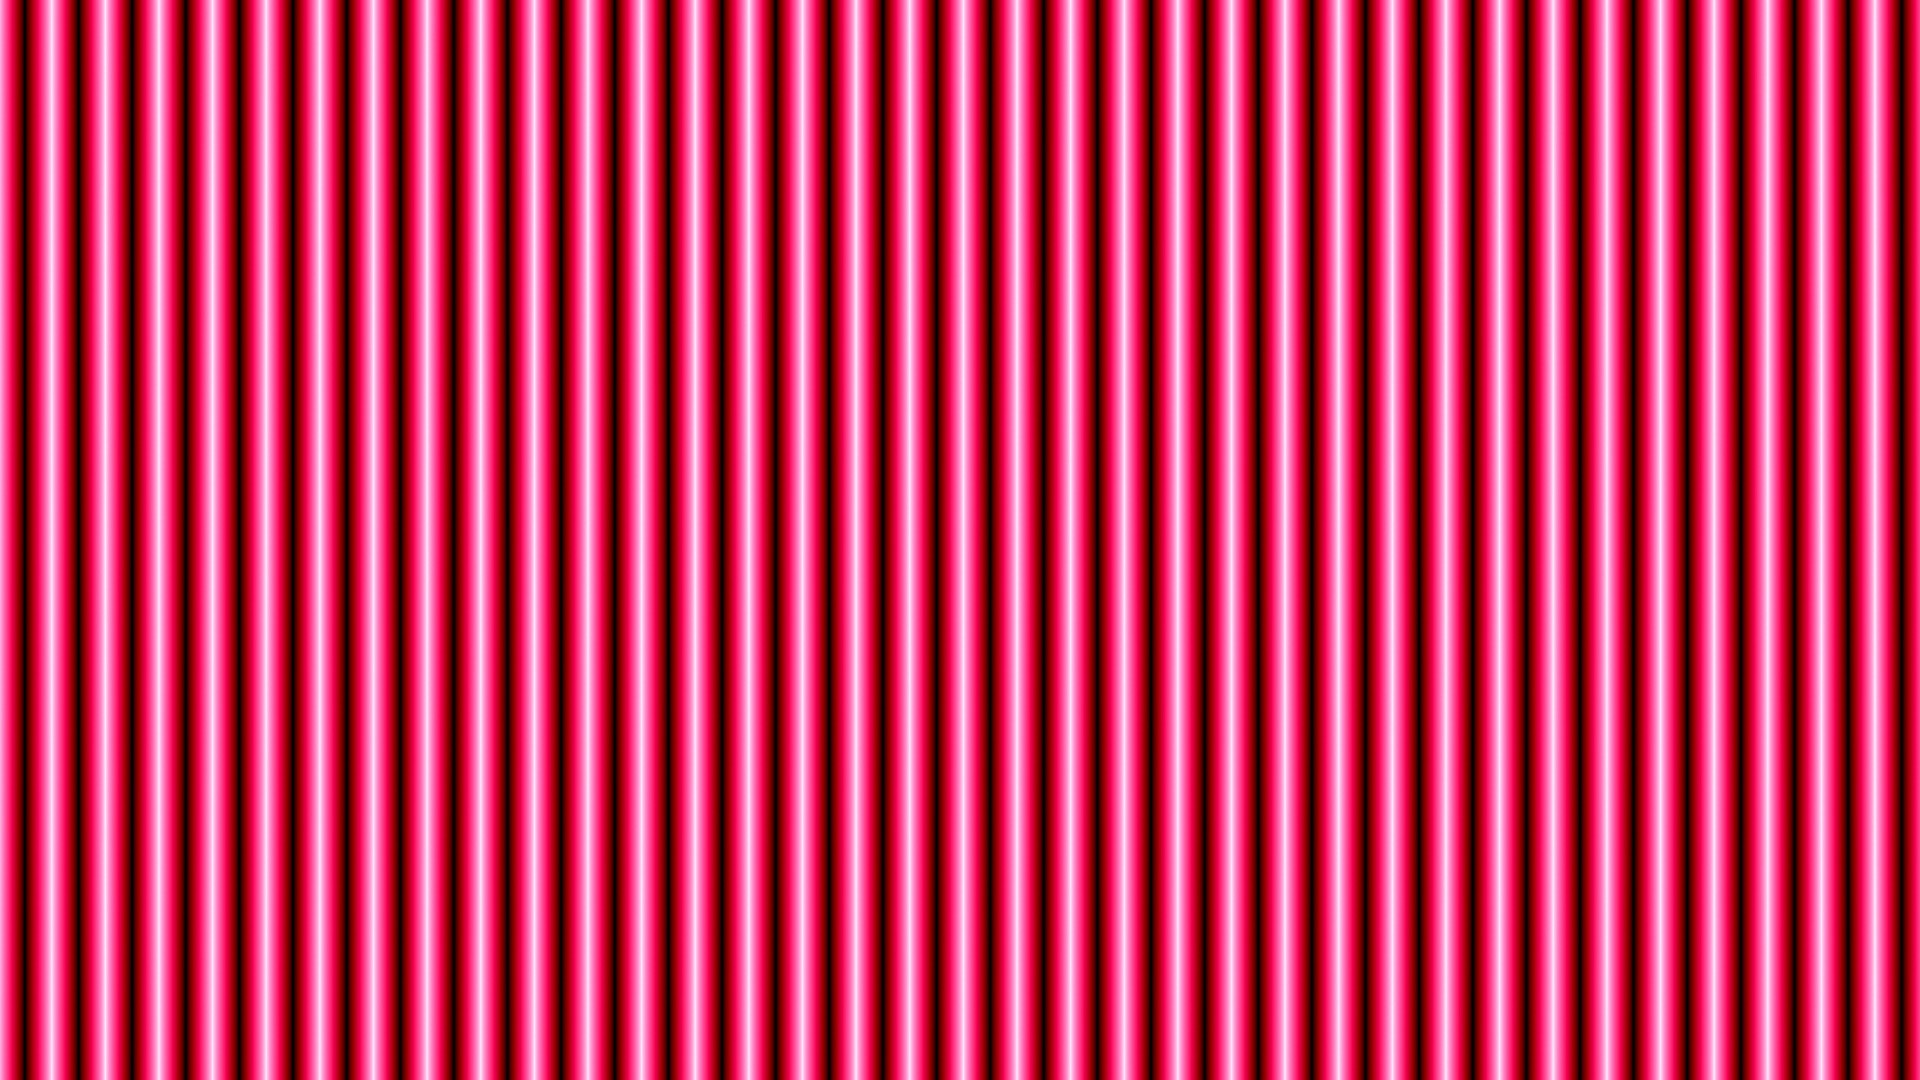 Red Bars Pattern Background